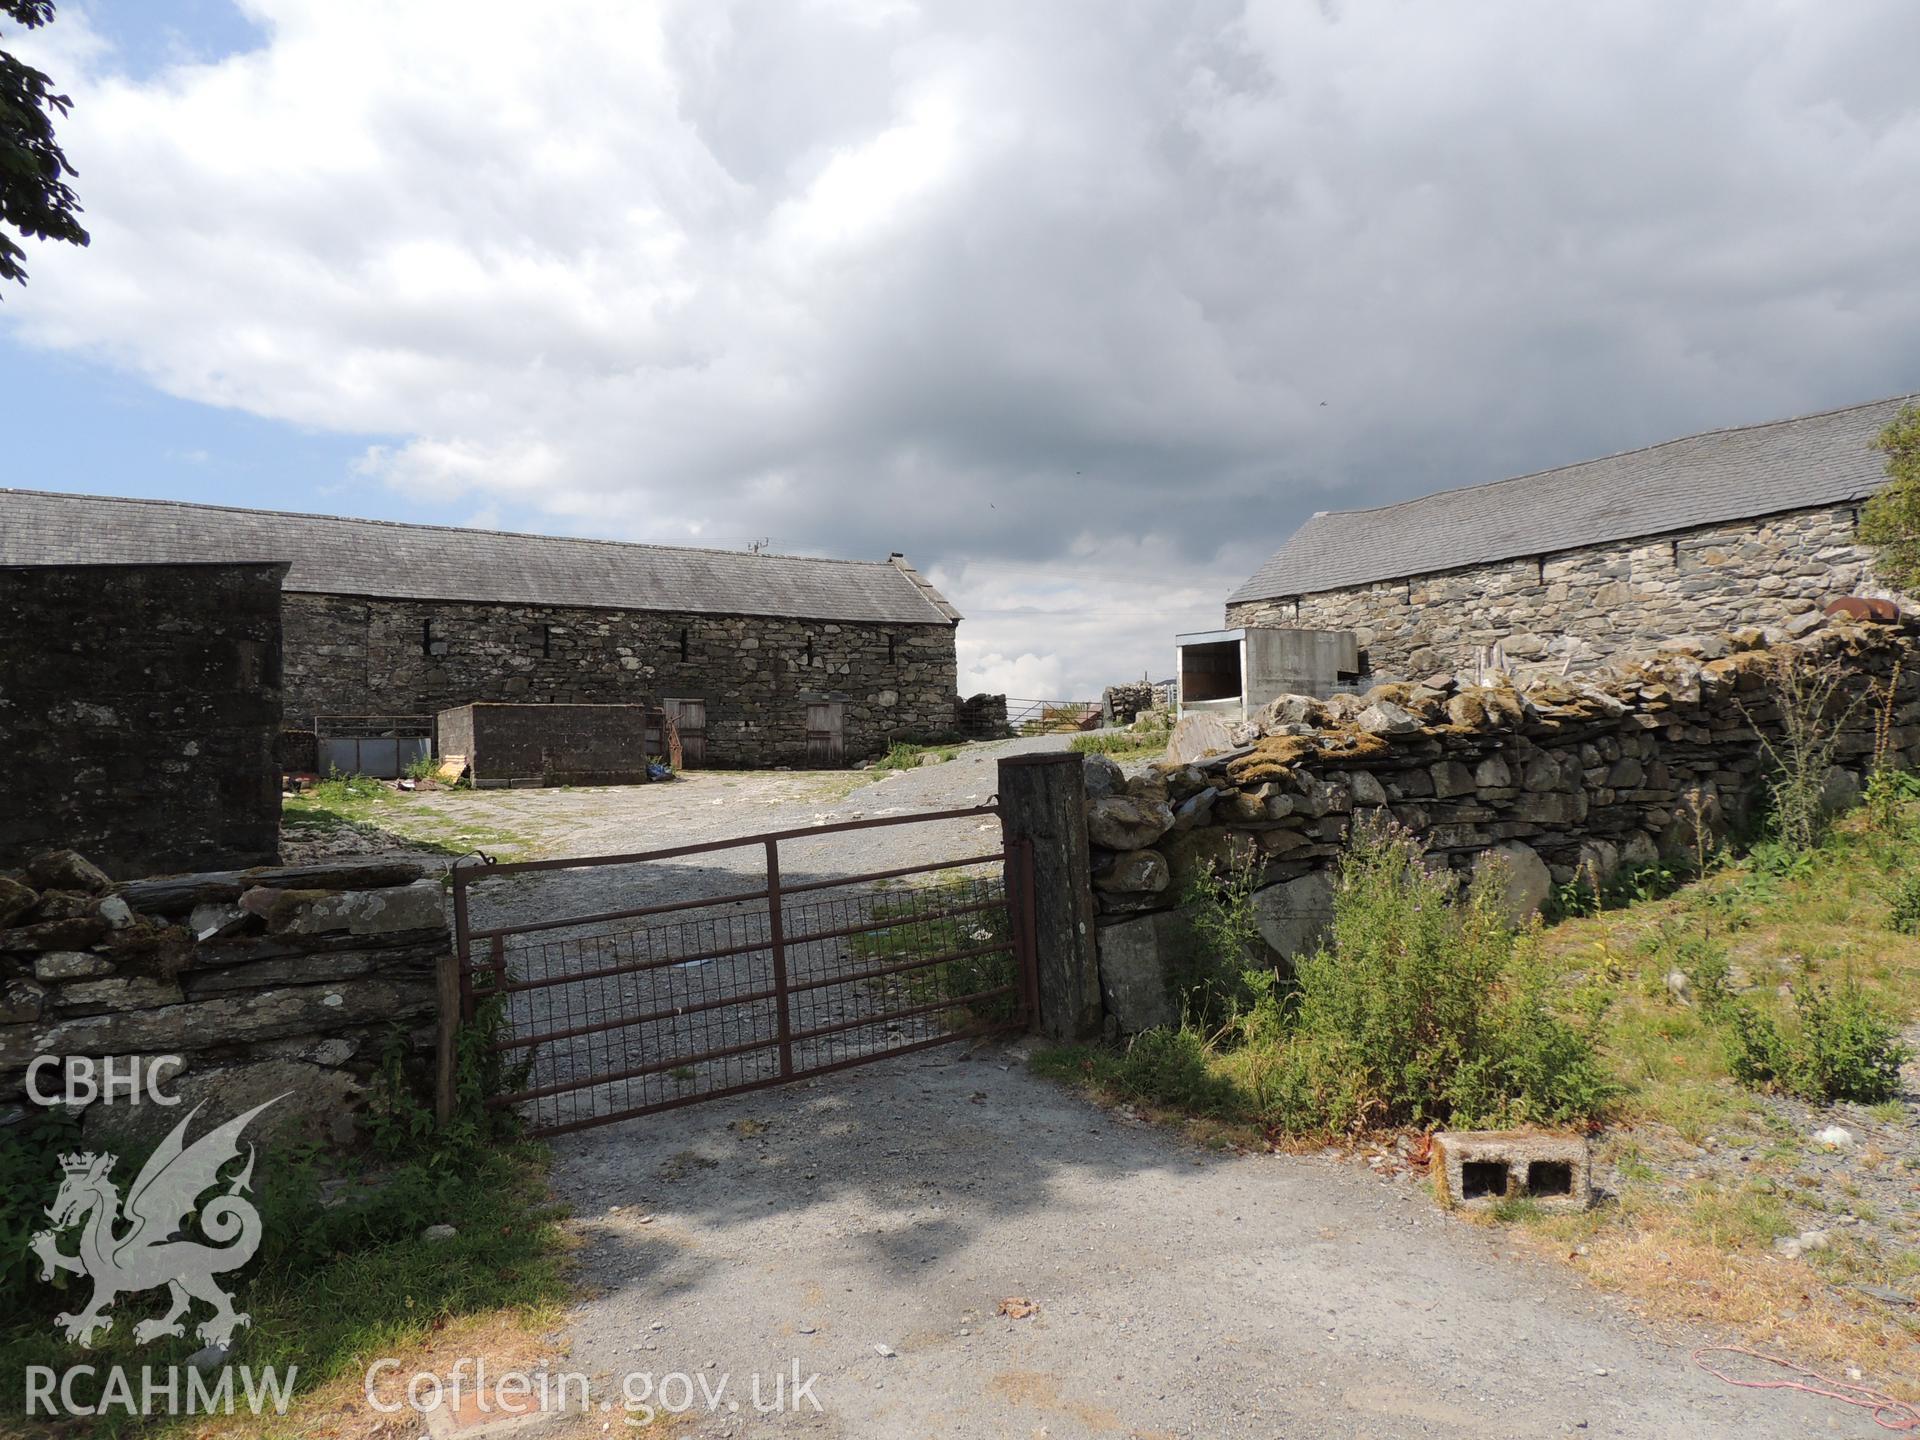 'View of Parc farmyard looking east north-east.' Photographed as part of desk based assessment and heritage impact assessment of a hydro scheme on the Afon Croesor, Brondanw Estate, Gwynedd. Produced by Archaeology Wales for Renewables First Ltd. 2018.